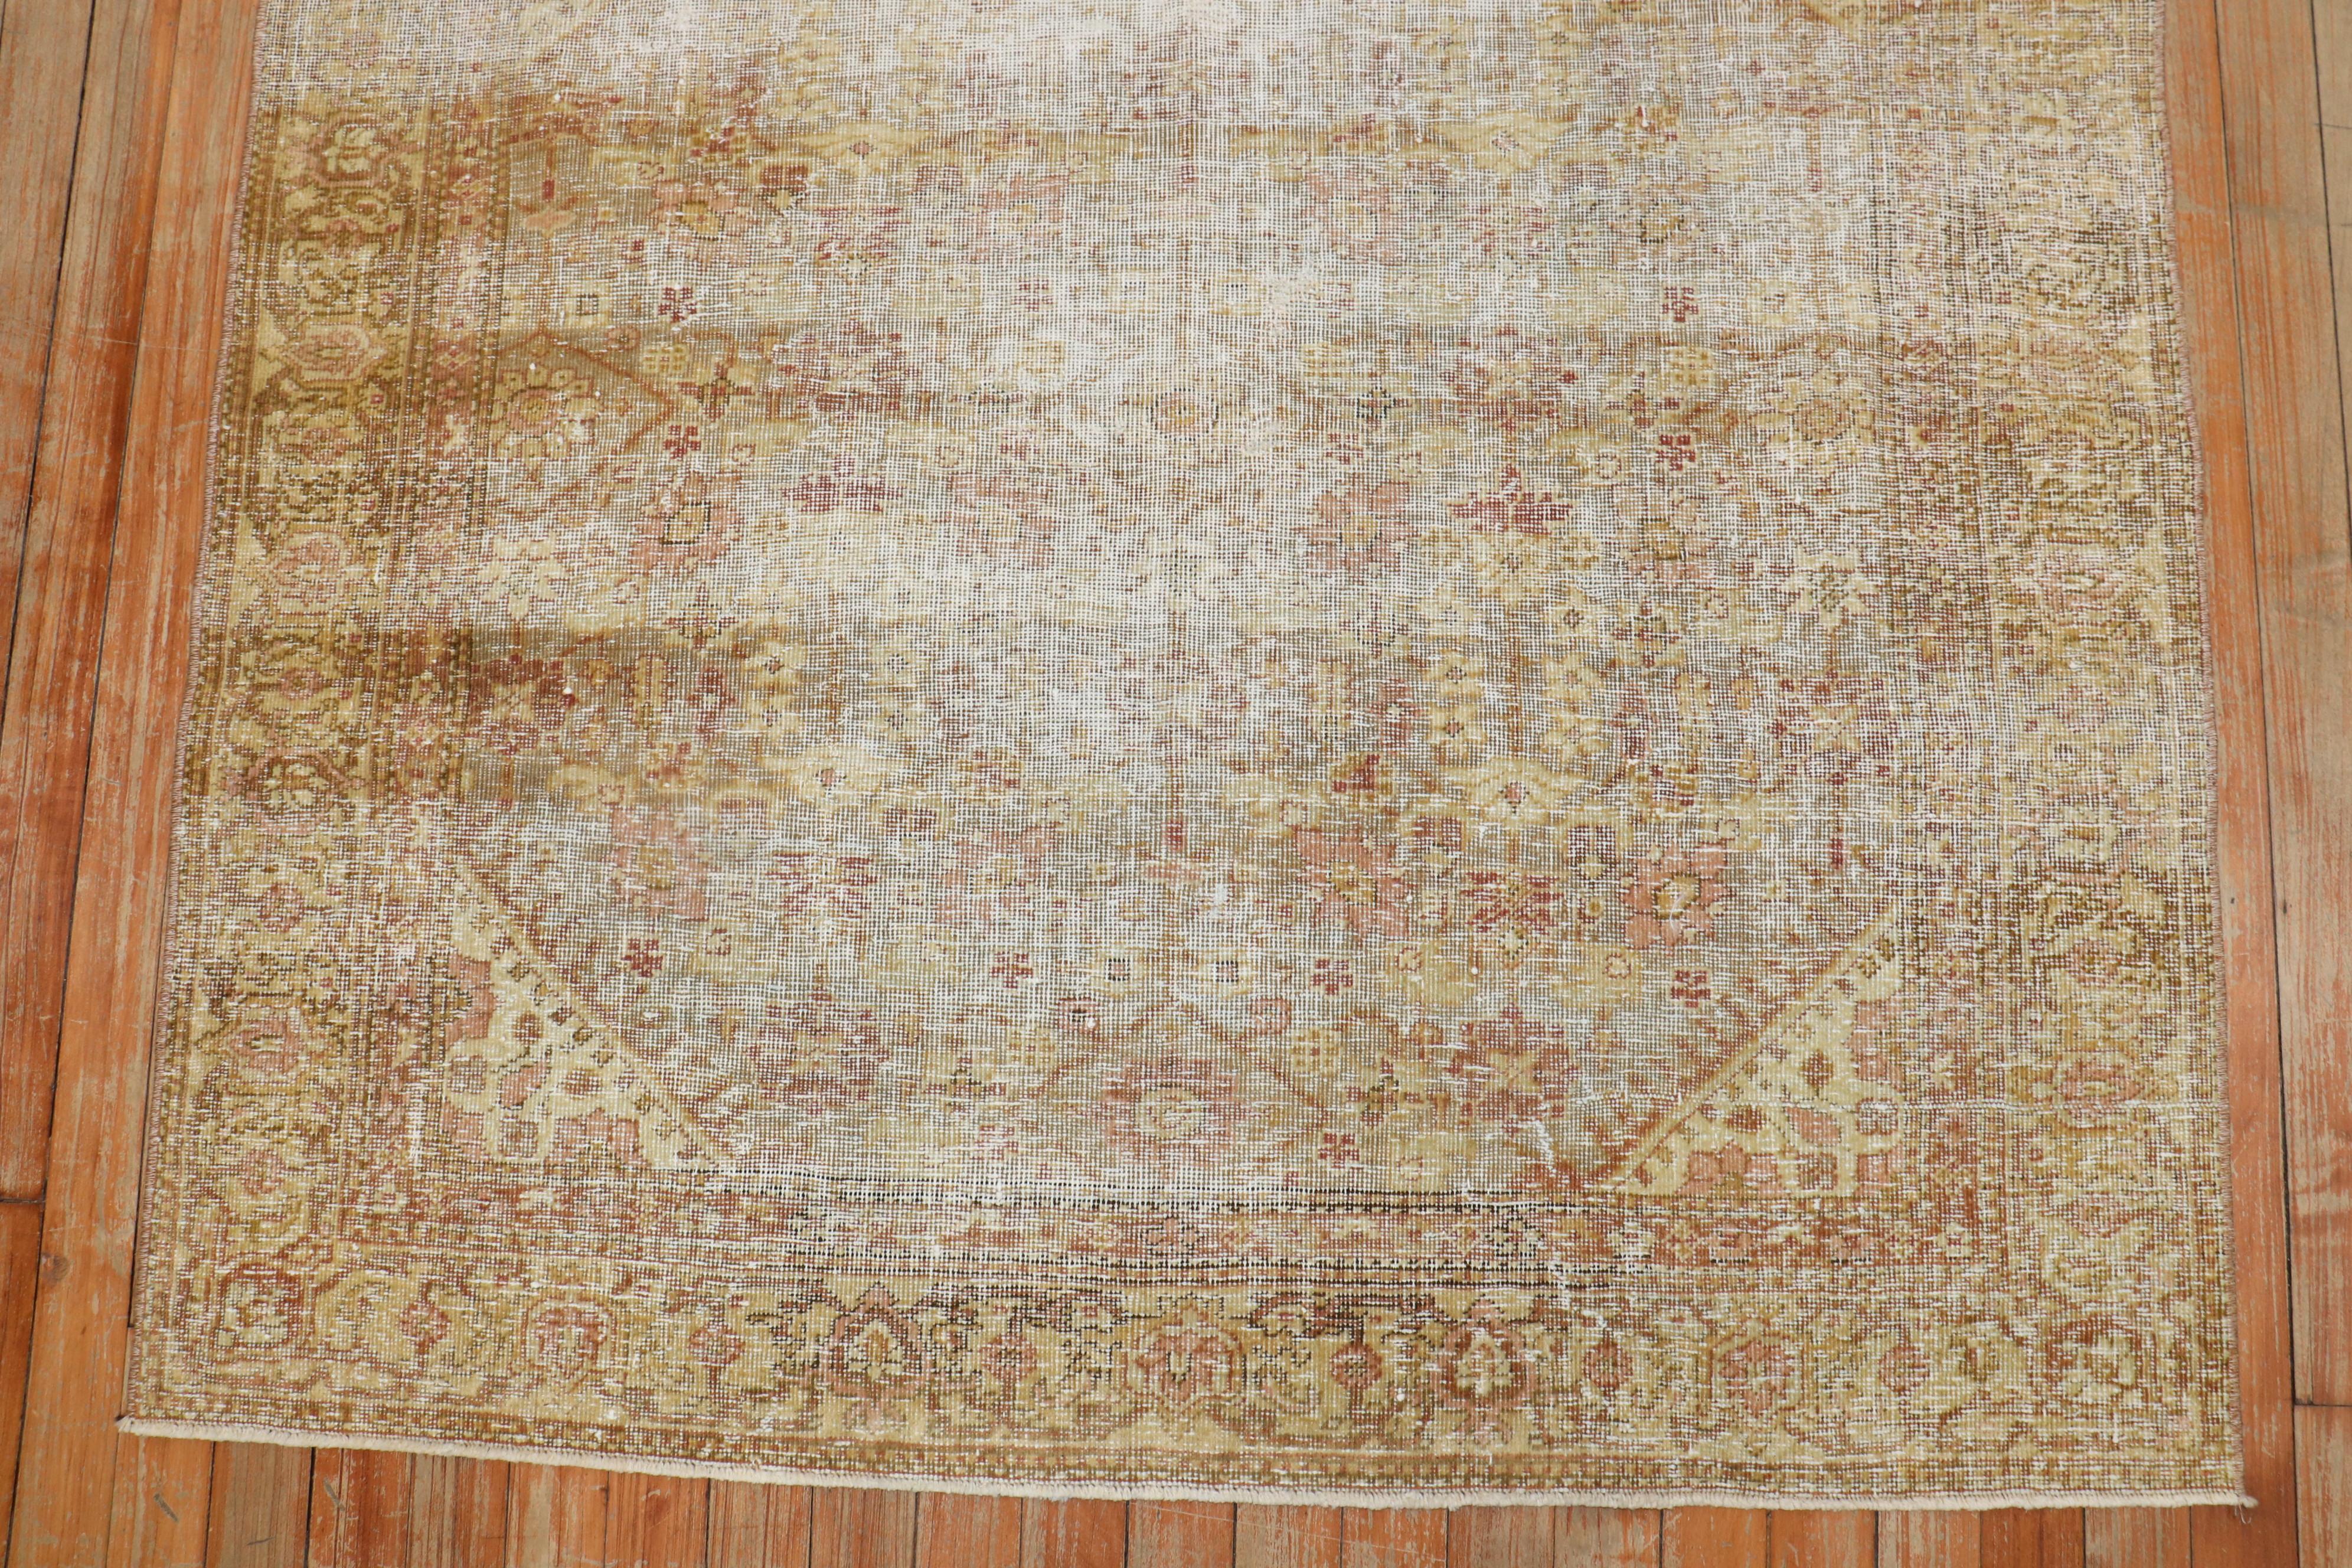 Spanish Colonial Worn Square Antique Indian Rug For Sale